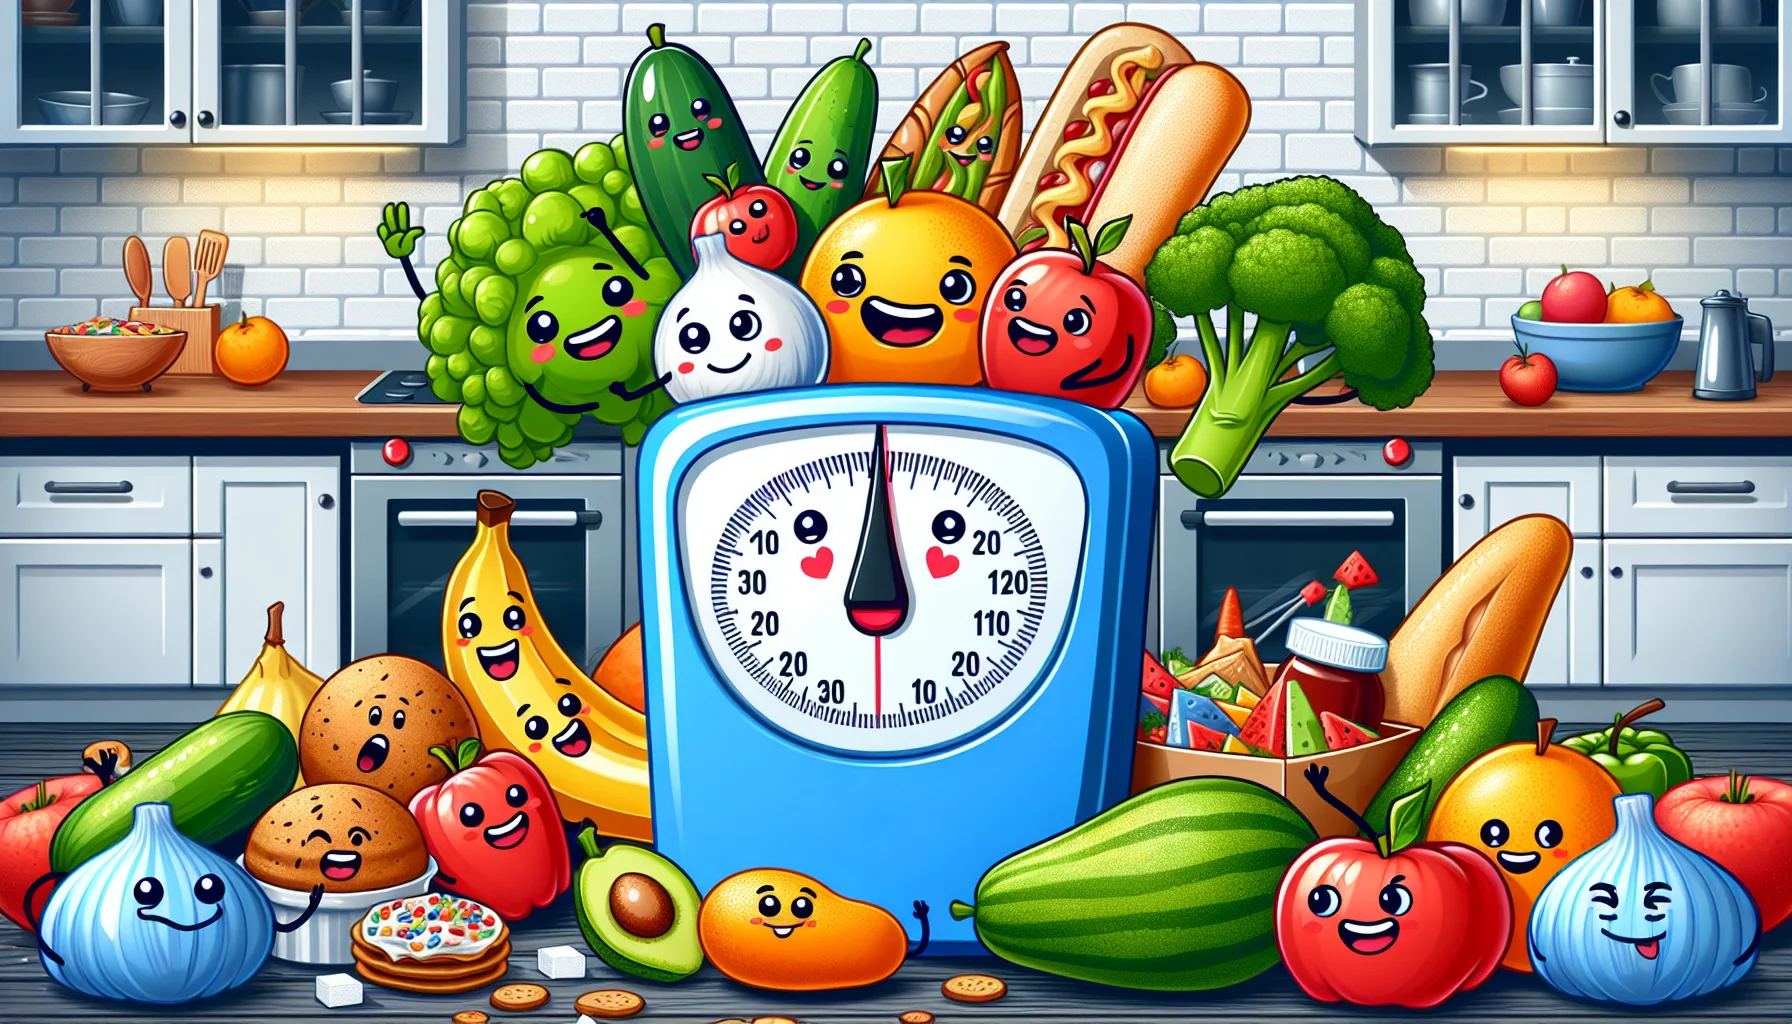 Create an engaging and amusing image depicting a typical kitchen scene. There is an accurate scale meant for diabetic patients prominently displayed. This scale is surrounded by a variety of affordable, nutritious foods like fresh fruits, vegetables, and whole grain products. A humorous cartoon is unfolding where smiling fruits and vegetables, personified with friendly faces, are somehow 'winning' a game against junk food items. The junk food characters look surprised and defeated. This image should convey a positive message about eating healthily for less money, specifically aimed at diabetic patients.